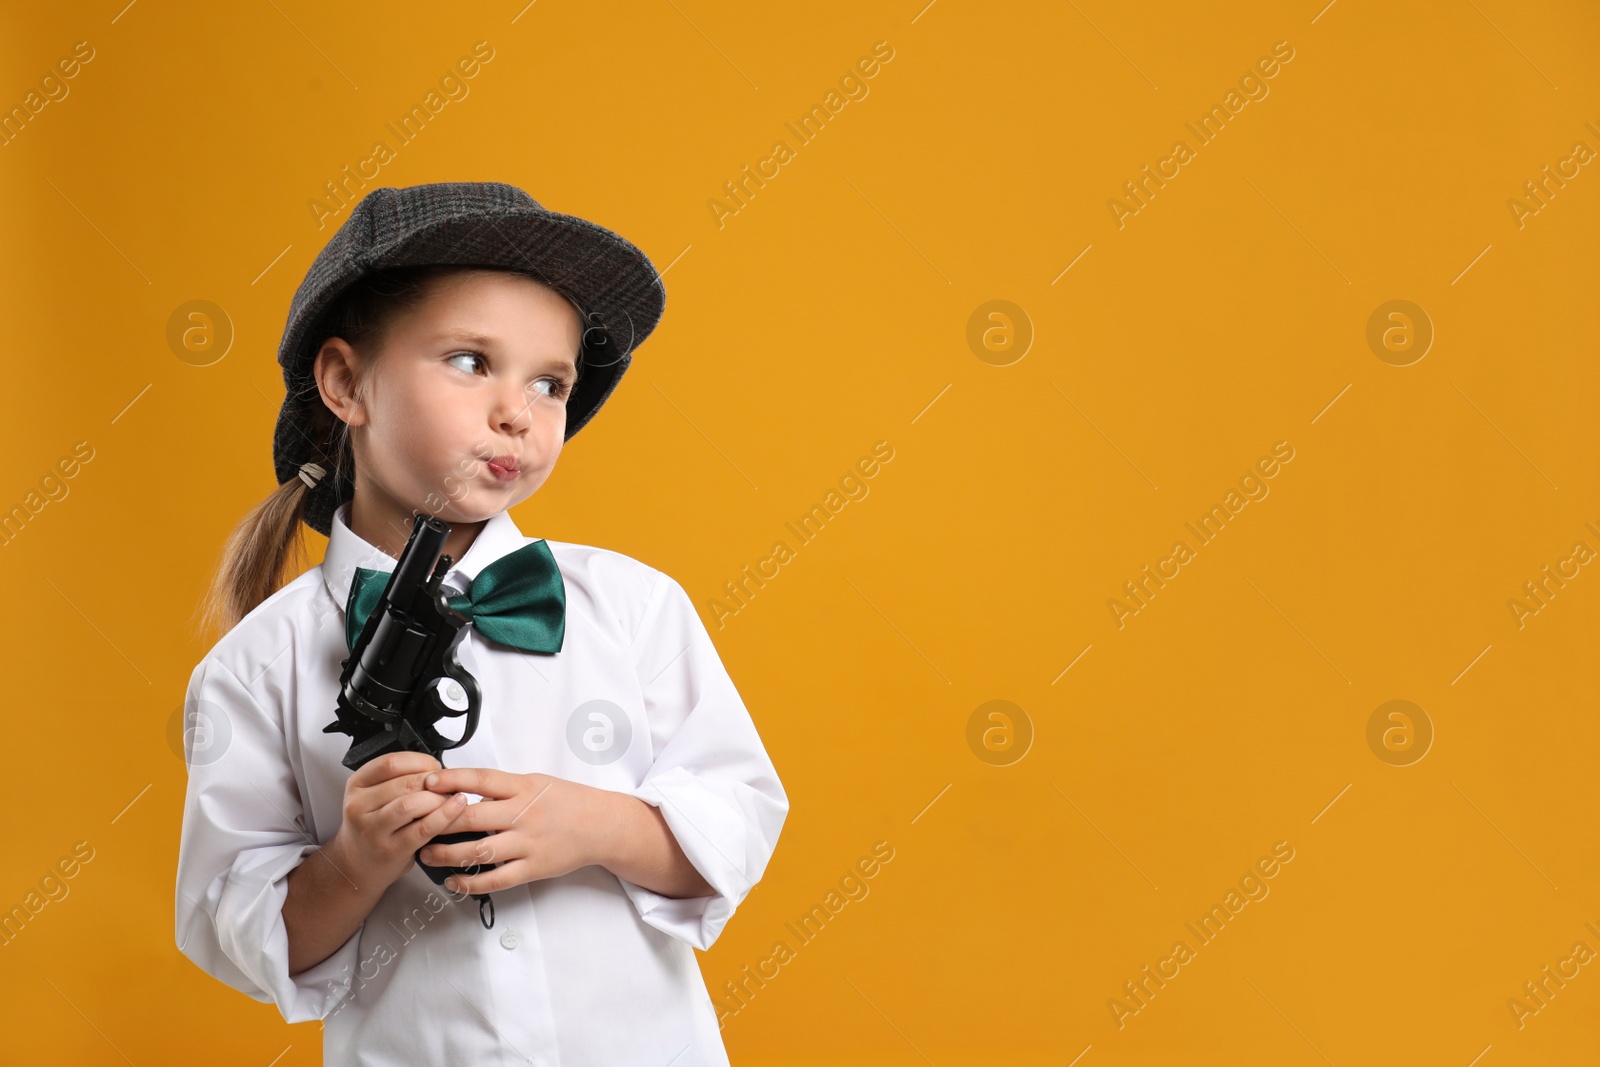 Photo of Cute little detective with revolver on yellow background. Space for text